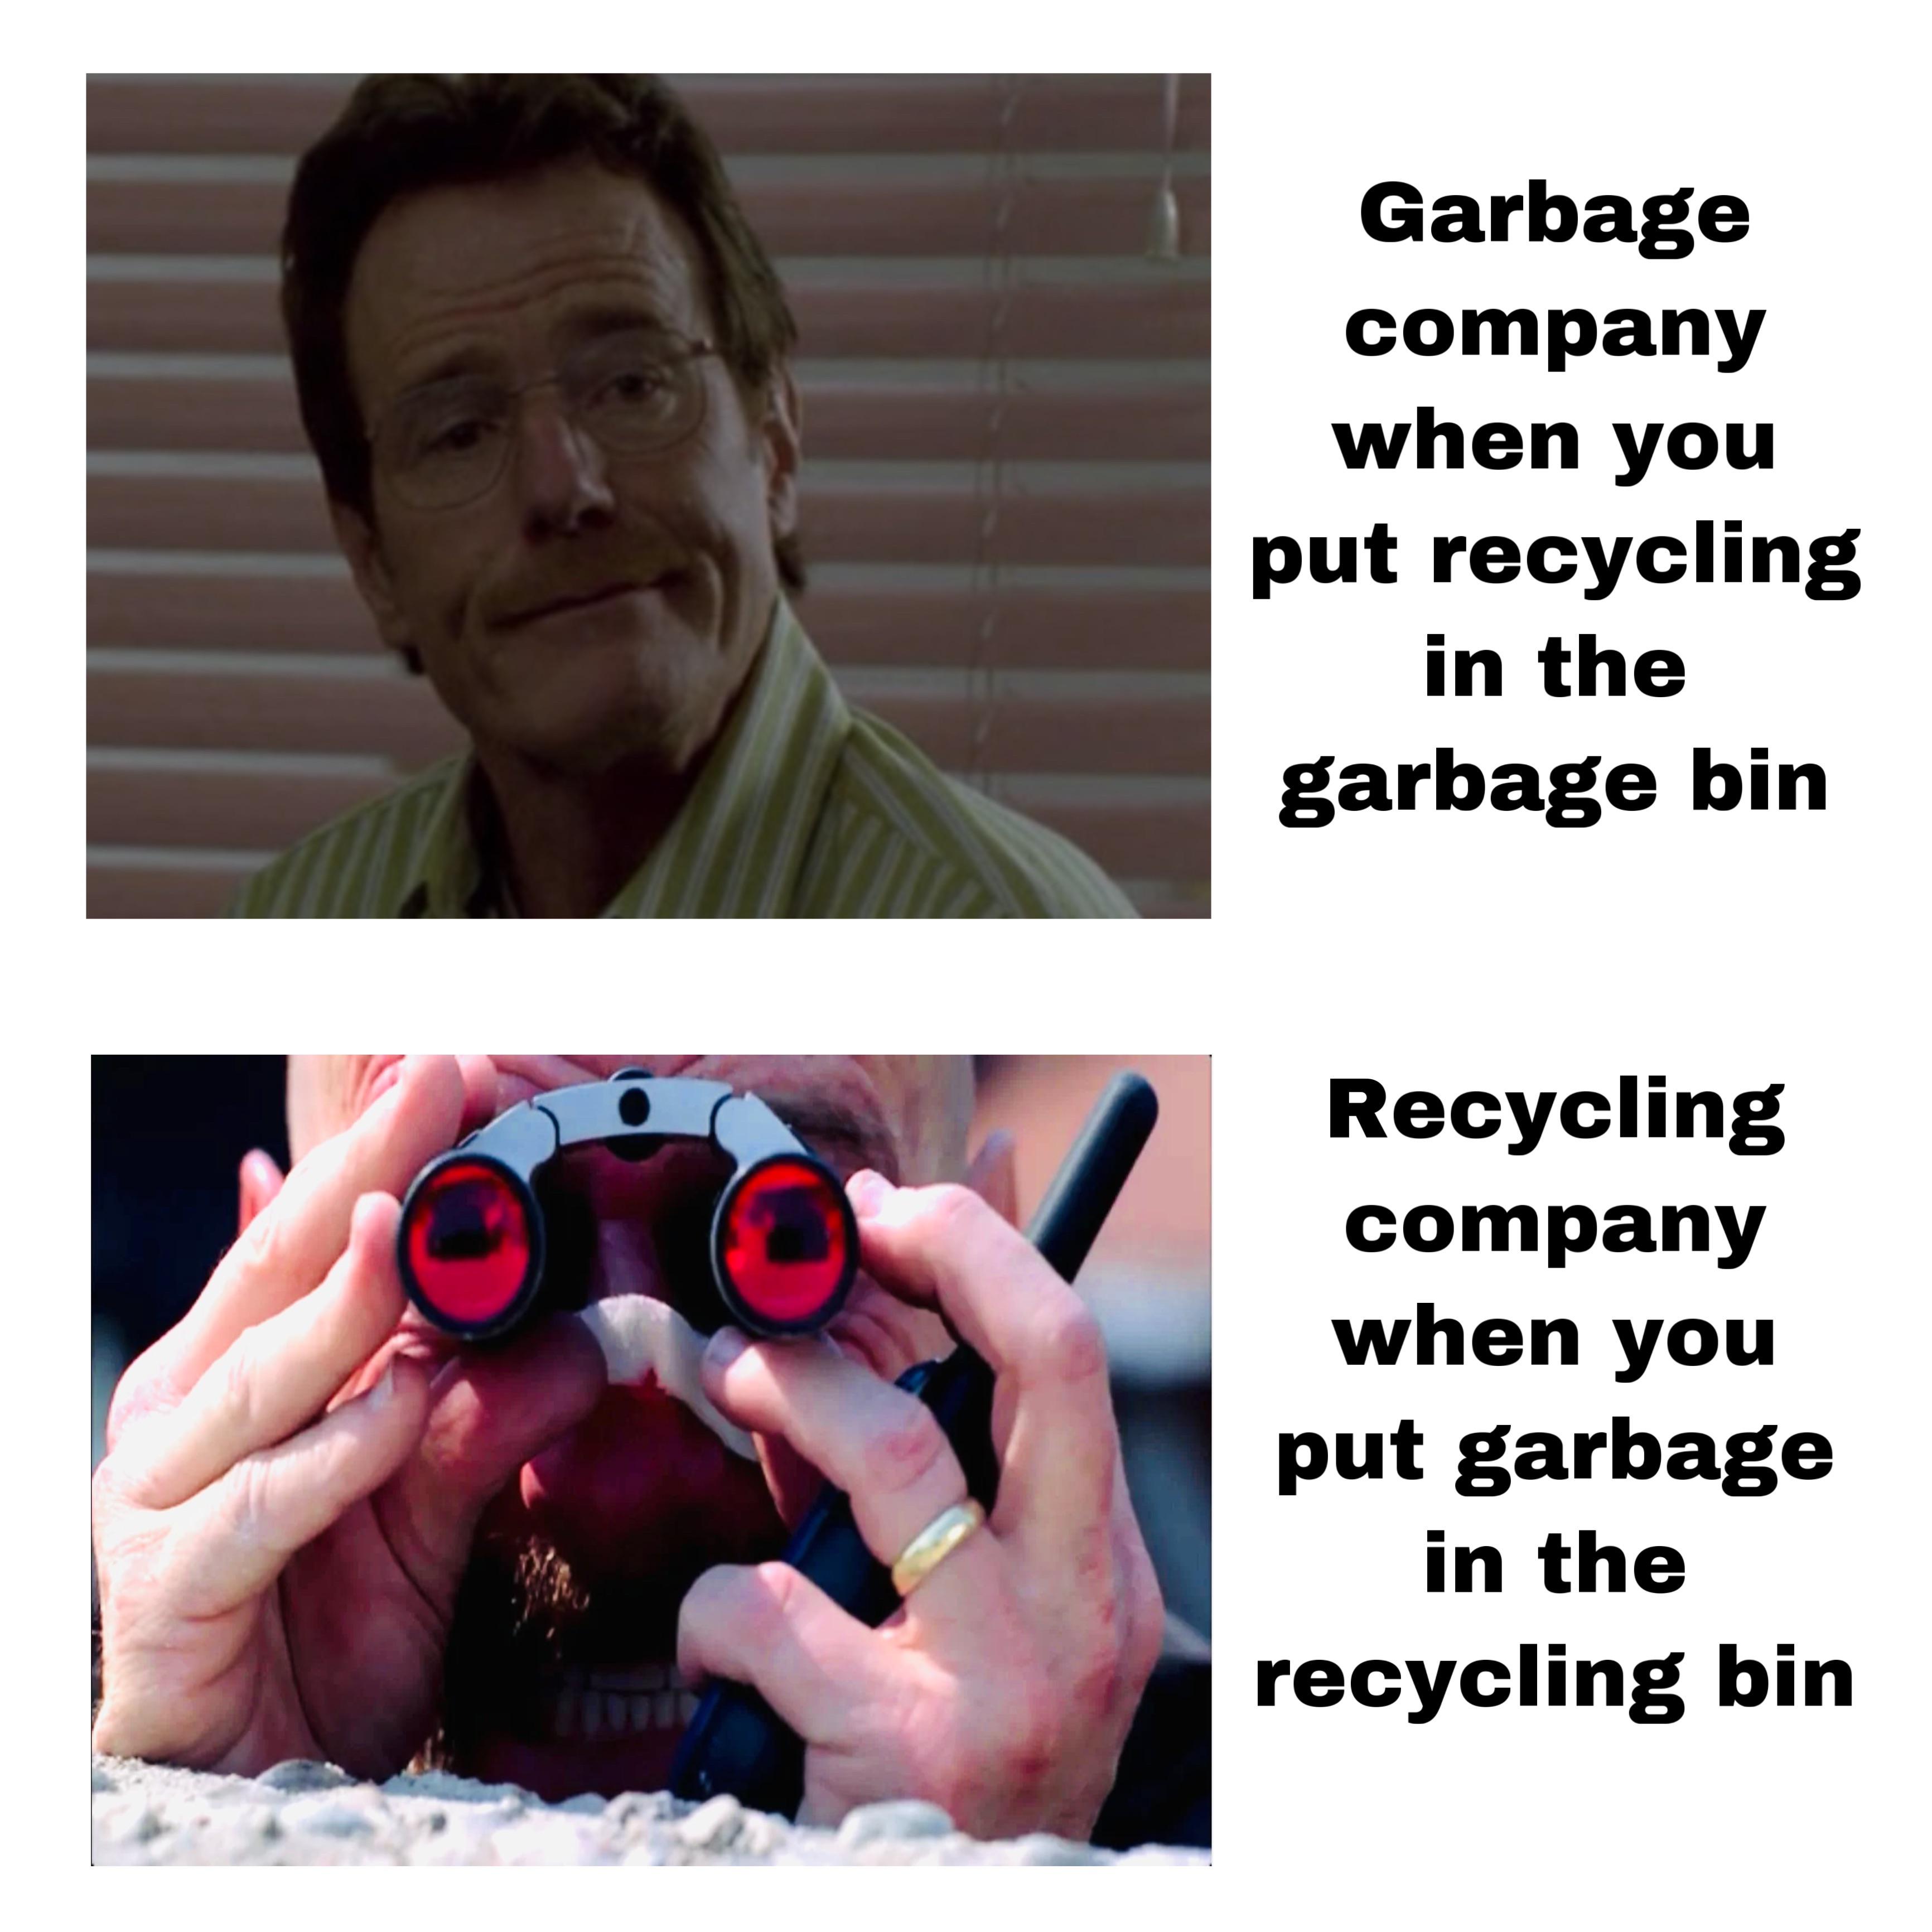 photo caption - Garbage company when you put recycling in the garbage bin Recycling company when you put garbage in the recycling bin